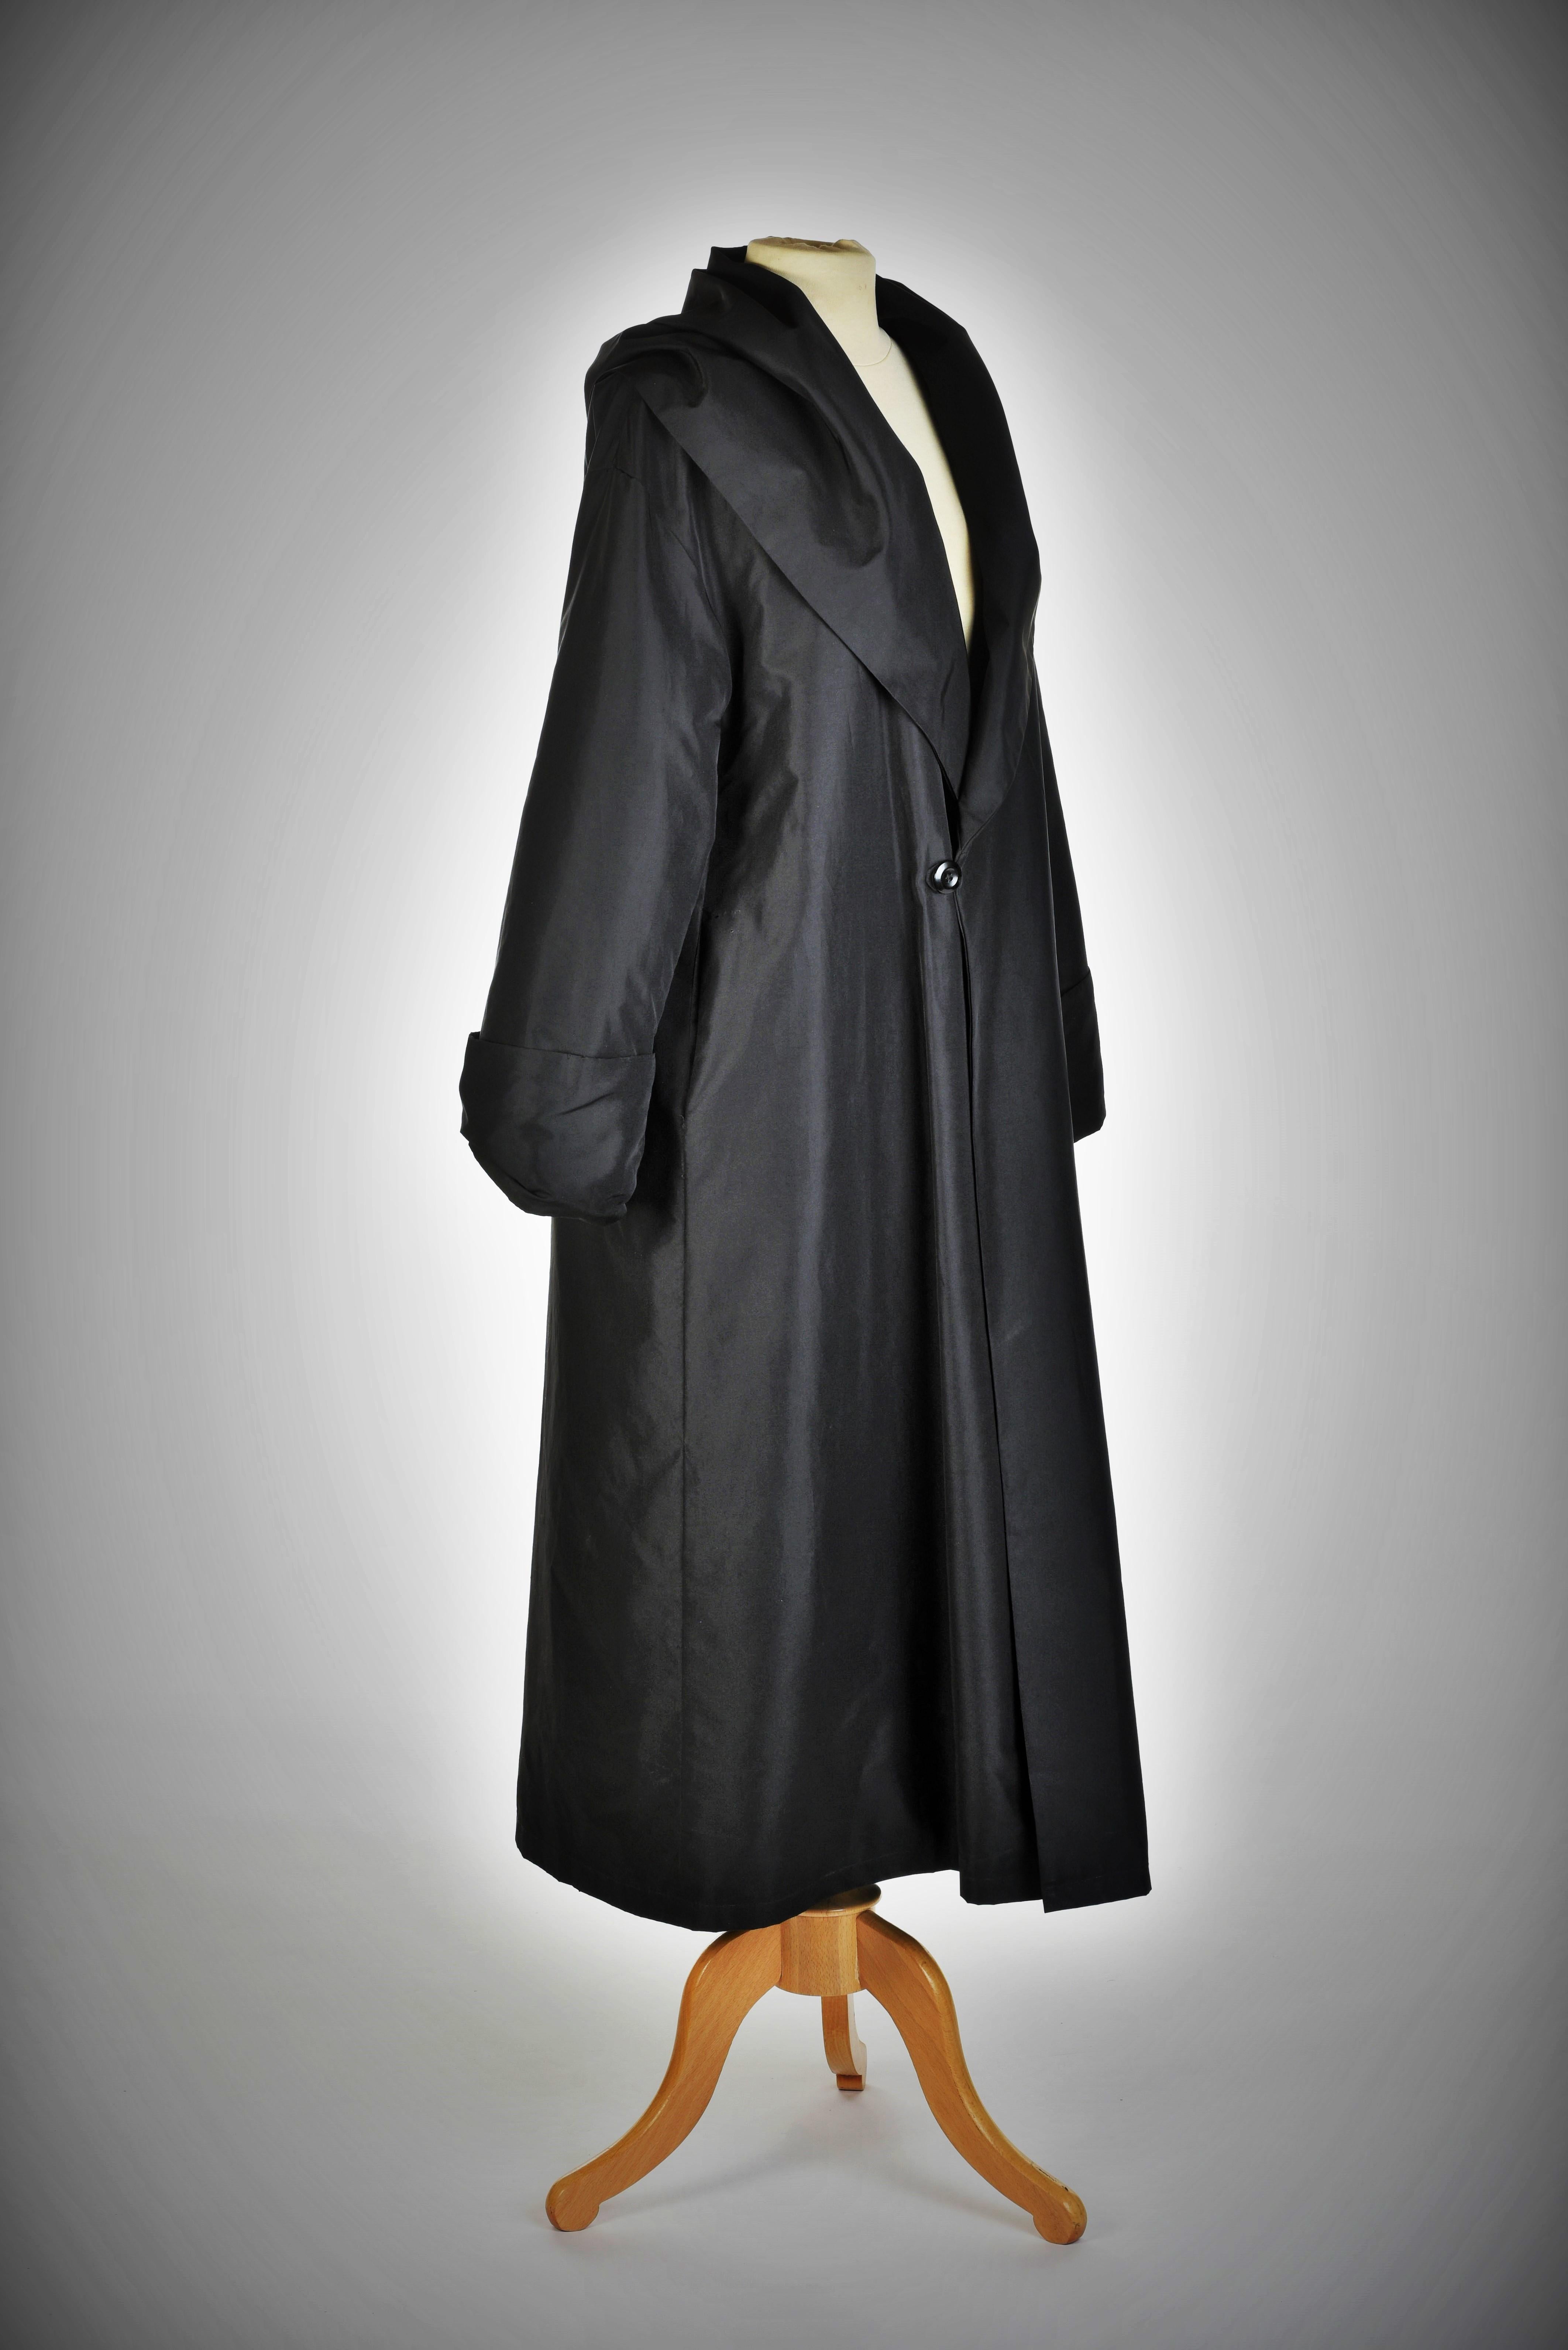 Circa 1955-1960

France

Black taffeta evening kimono coat from the 1950's. The lining and the label were changed in the 1980's, possibly by the Dior House as the lining and label are original. Loose fit and flared with long sleeves and cuffs. Side